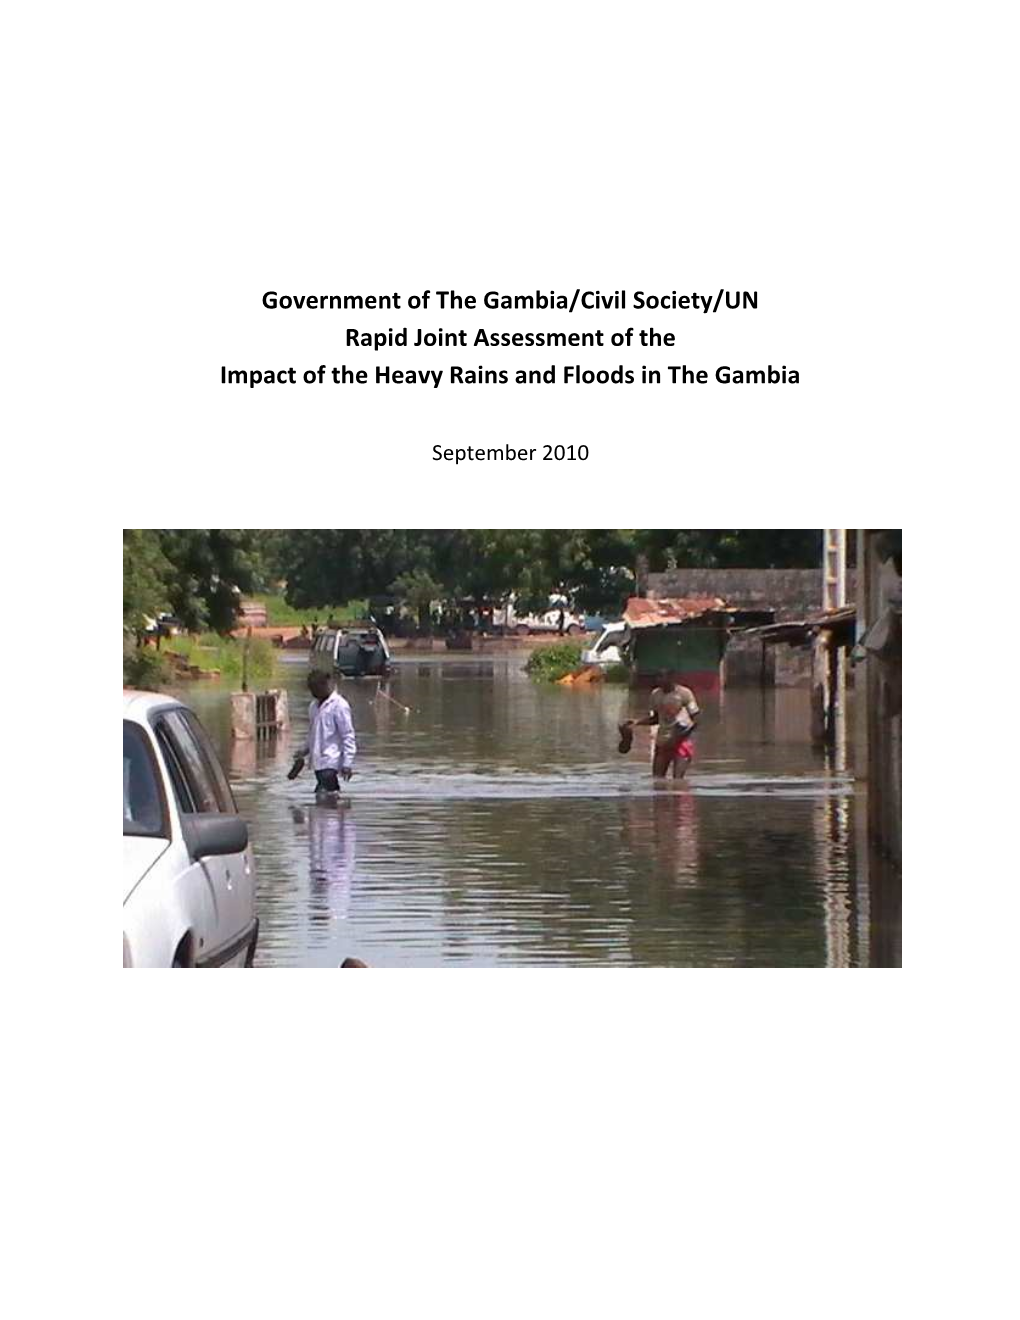 Gambia/Civil Society/UN Rapid Joint Assessment of the Impact of the Heavy Rains and Floods in the Gambia